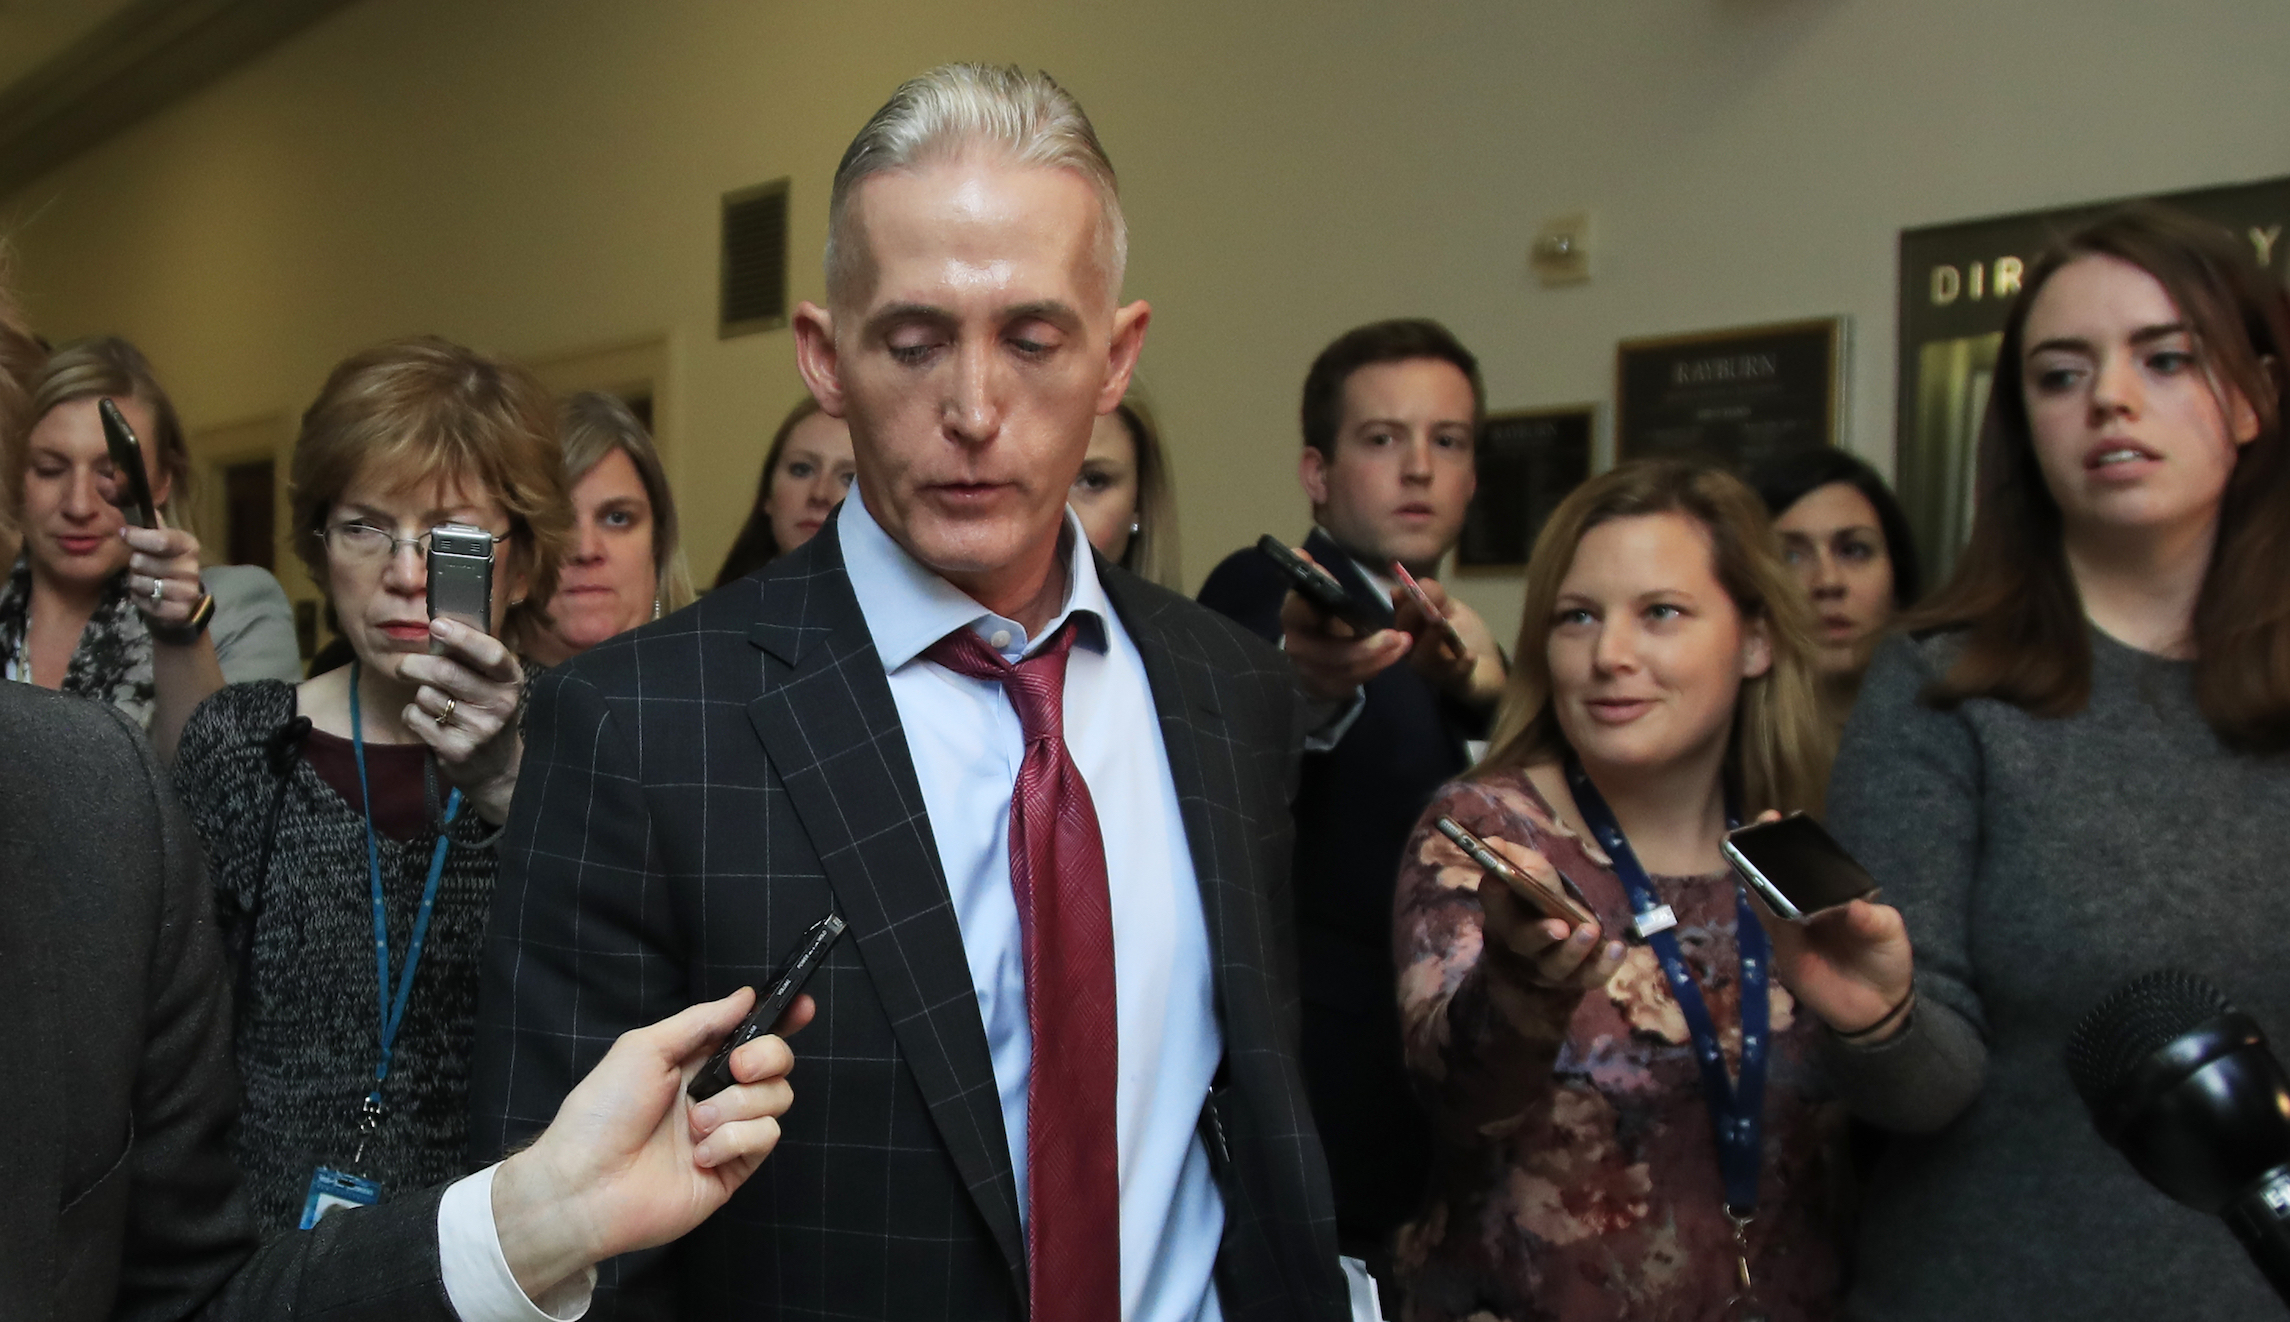 Trey Gowdy has signed on to help Trump through impeachment inquiry - Washington Examiner